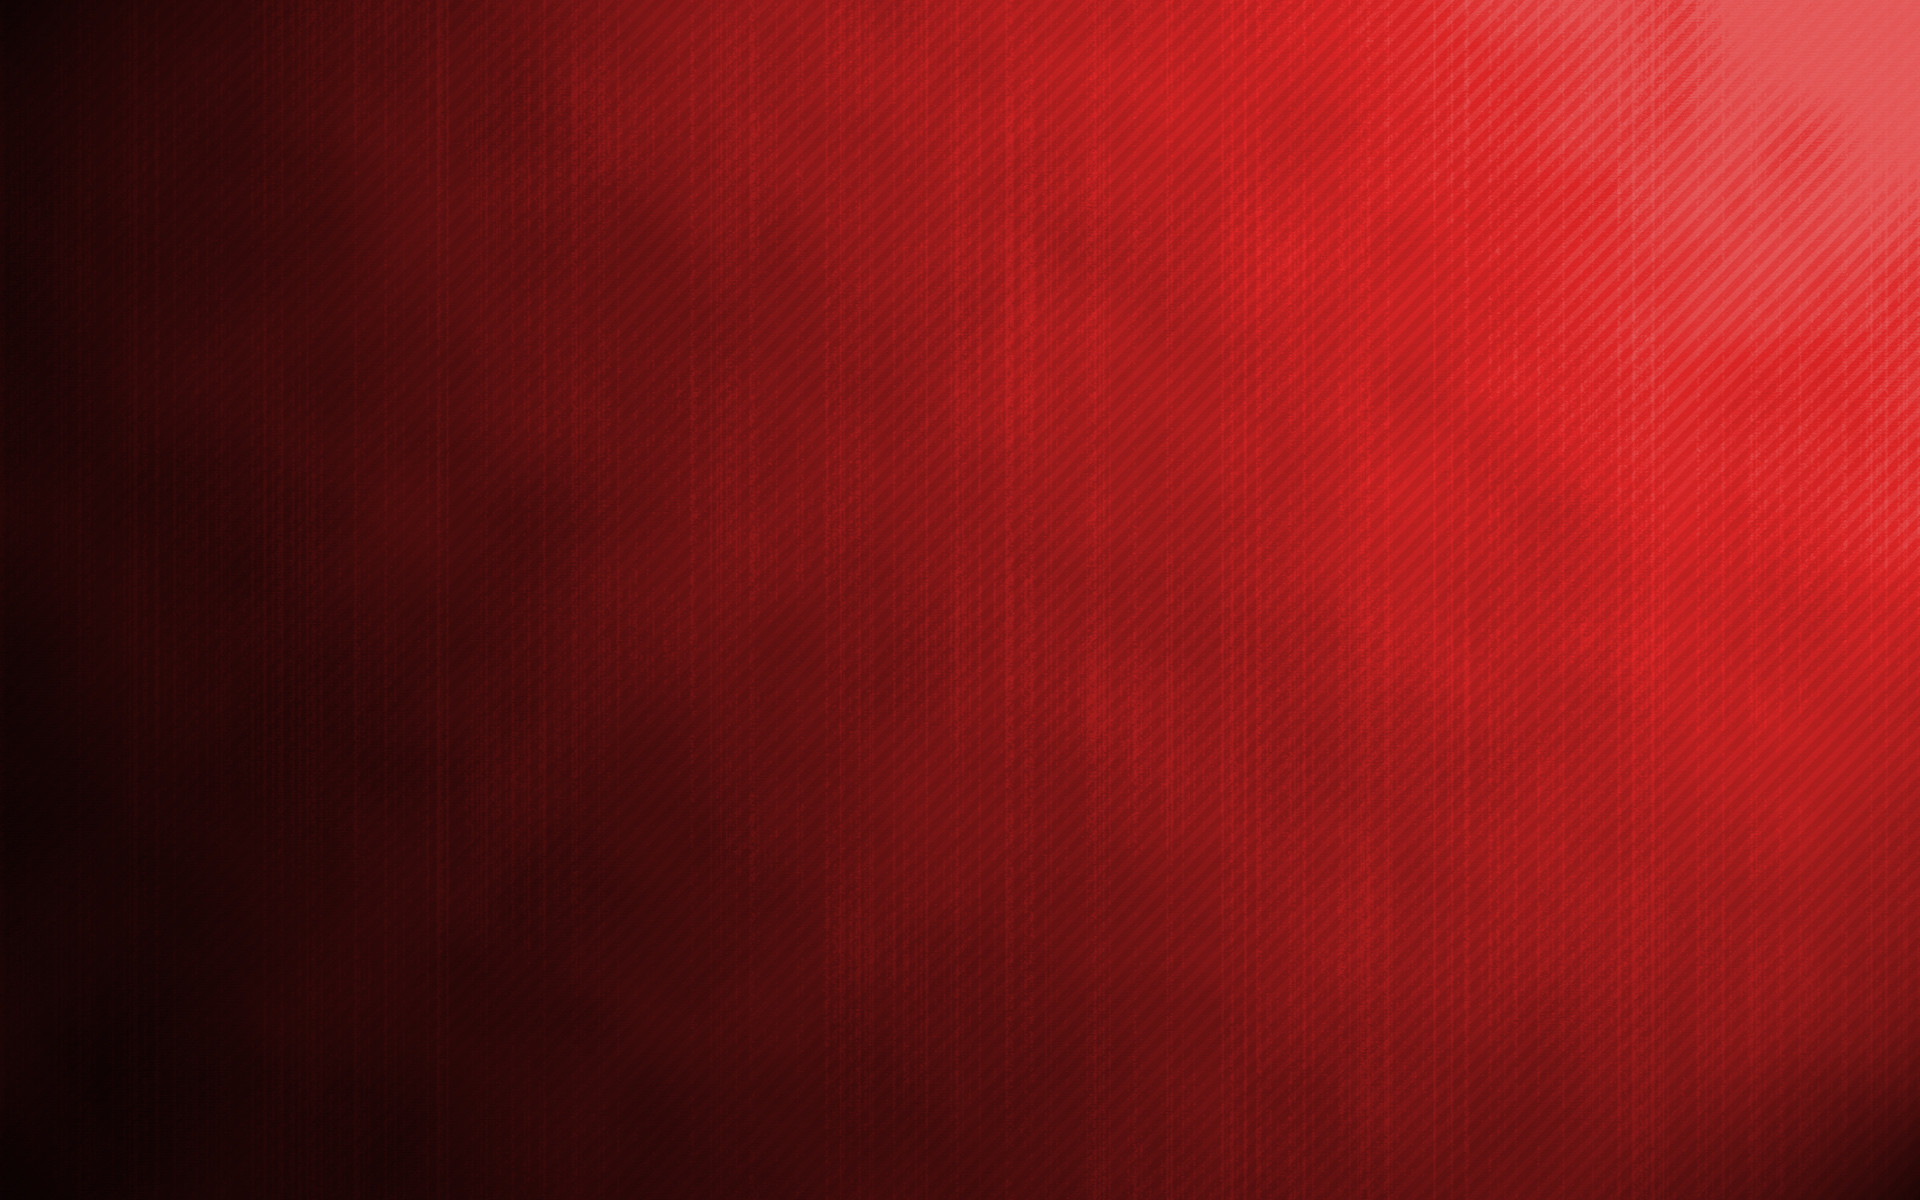 1920x1200 Free Dark Red Metal Backgrounds For PowerPoint - Curves PPT Templates